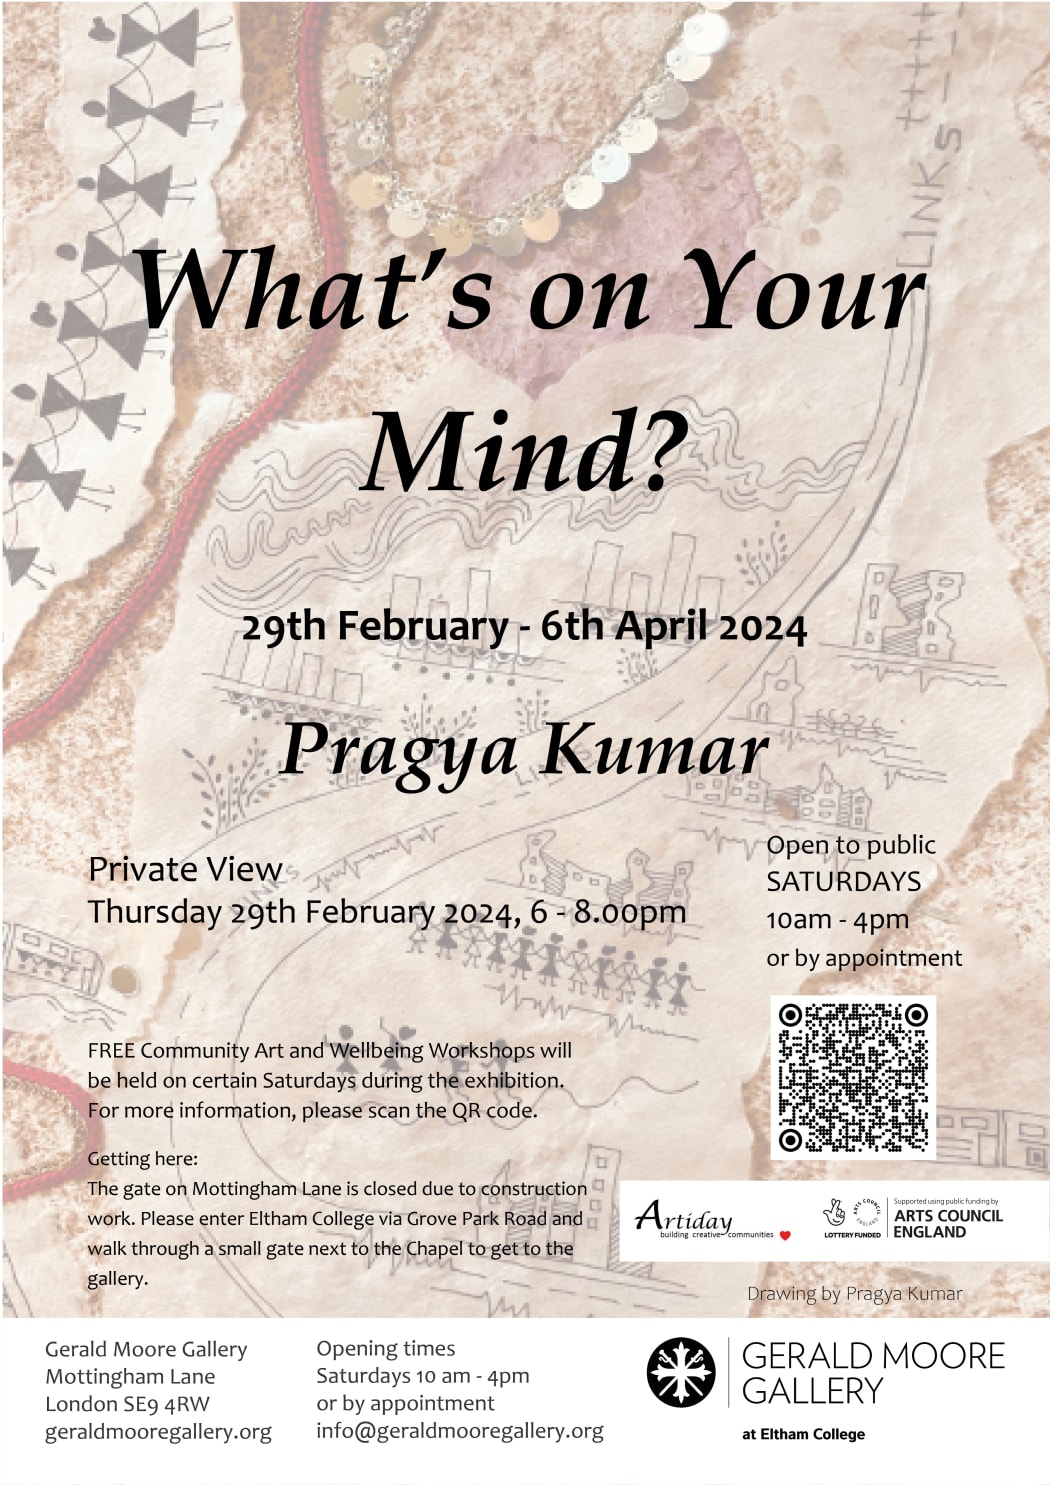 UPCOMING EXHIBITION: 'What's on Your Mind?' by Pragya Kumar